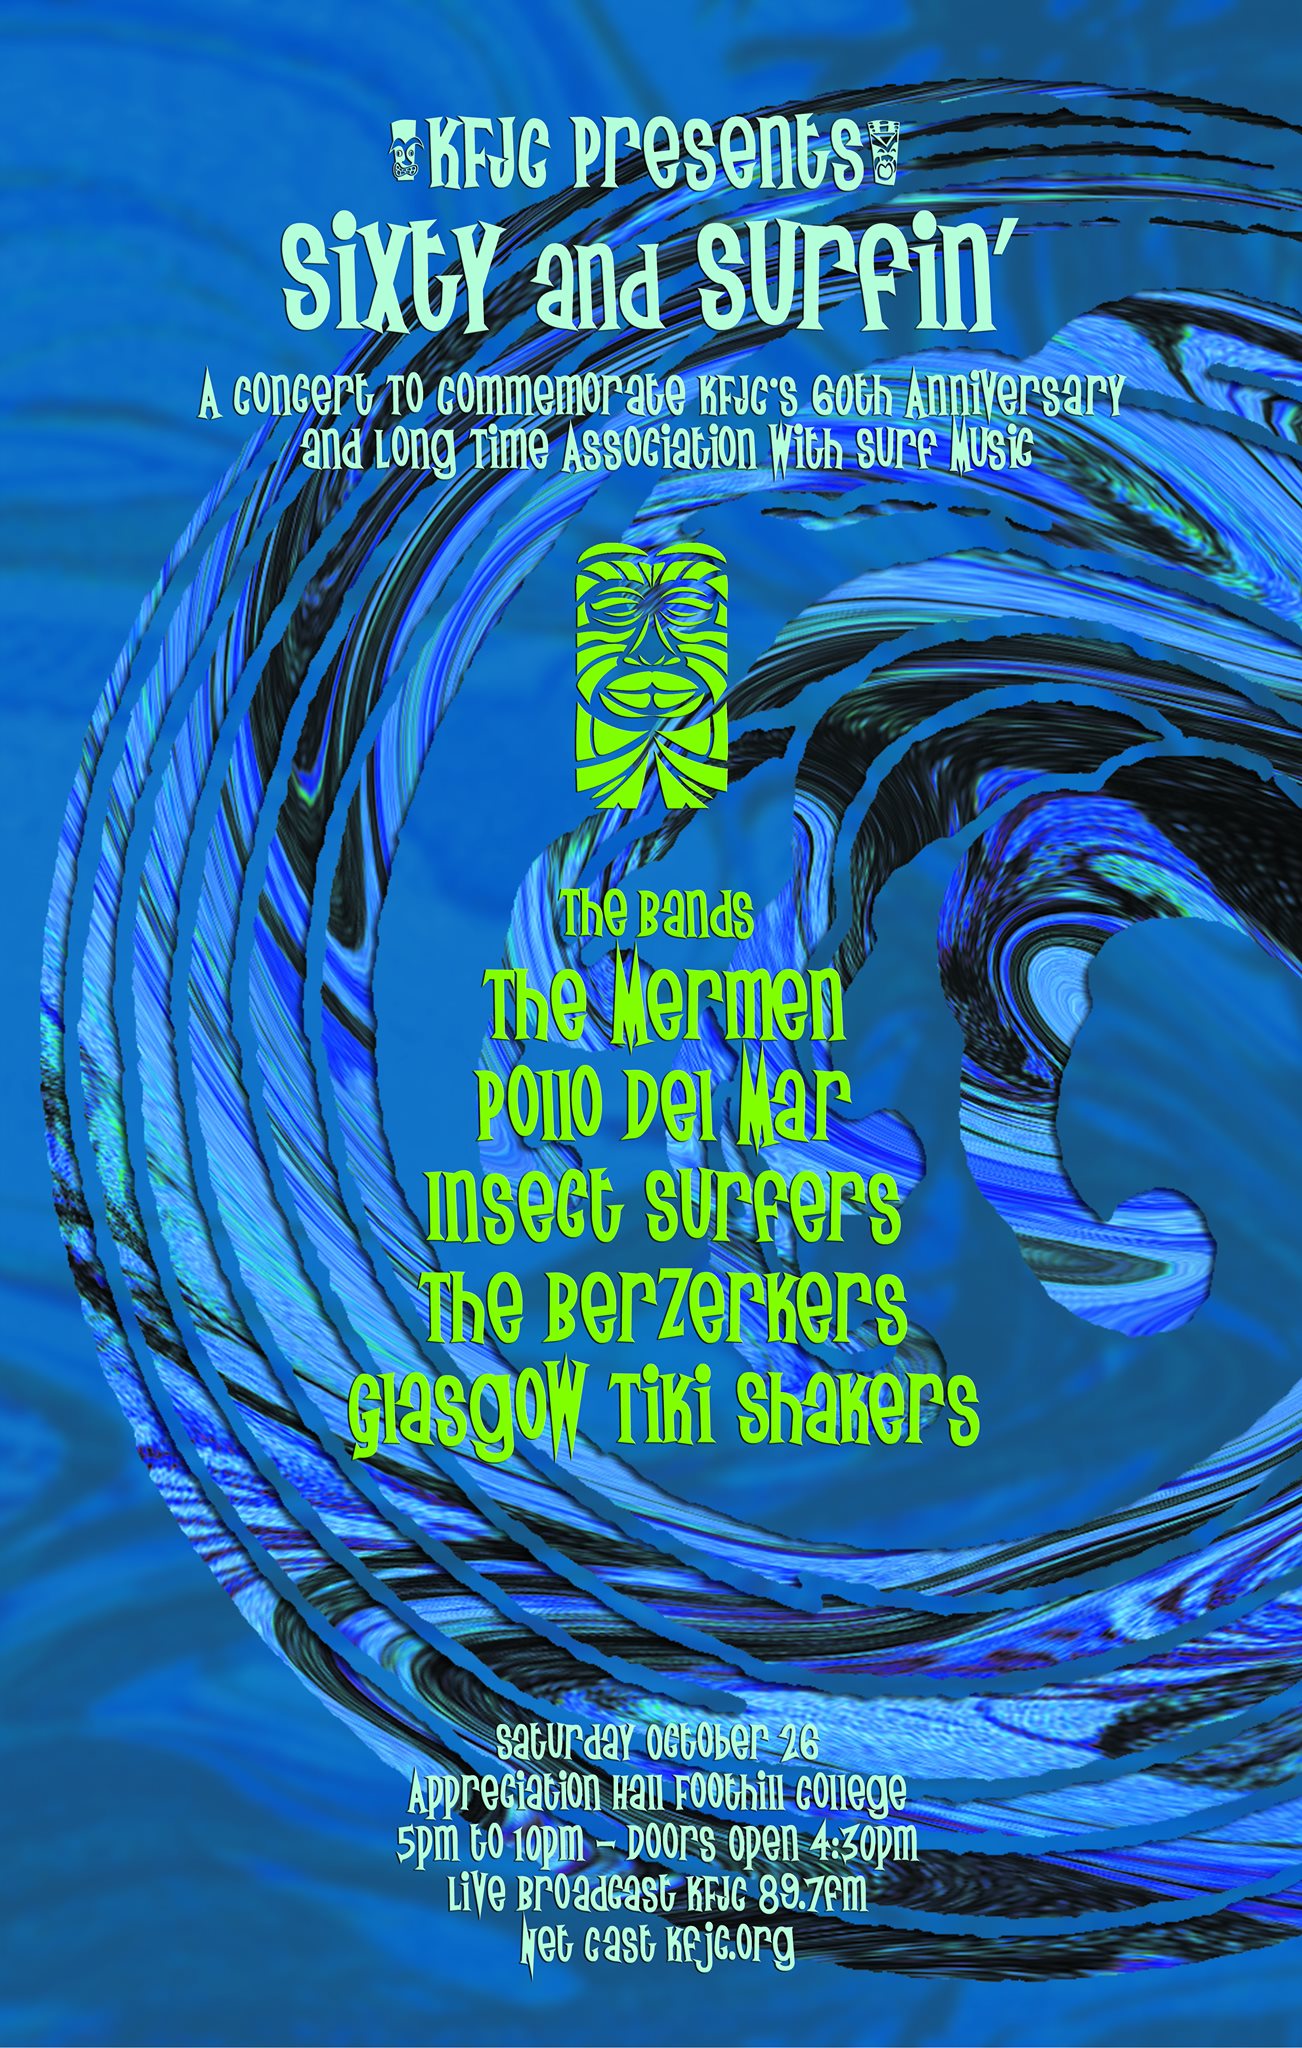 60 and Surfin' - KFJC Anniversary Surf Show Poster